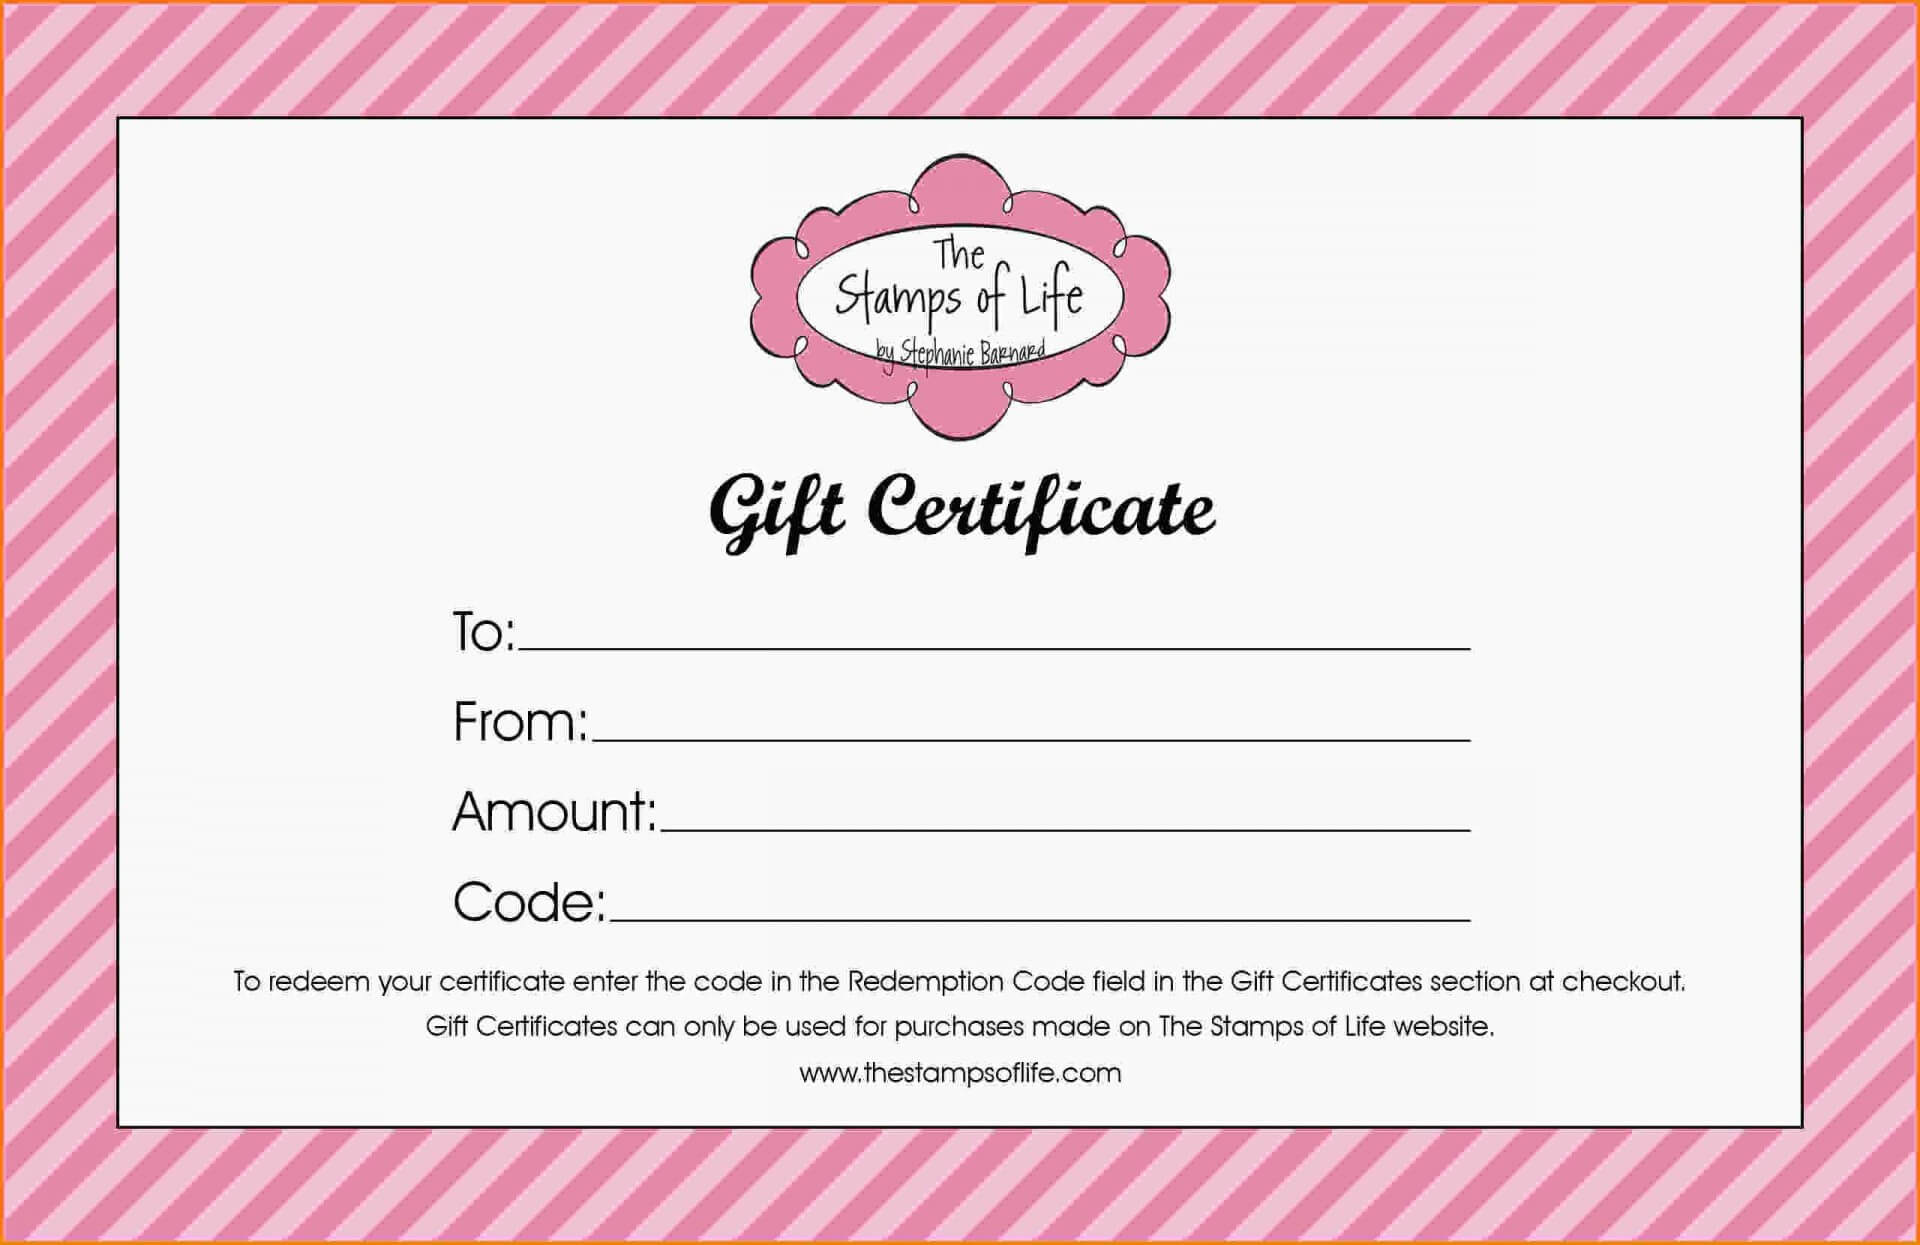 011 Free Certificates Printing For Nail Salon Gift Samples Within Nail Gift Certificate Template Free